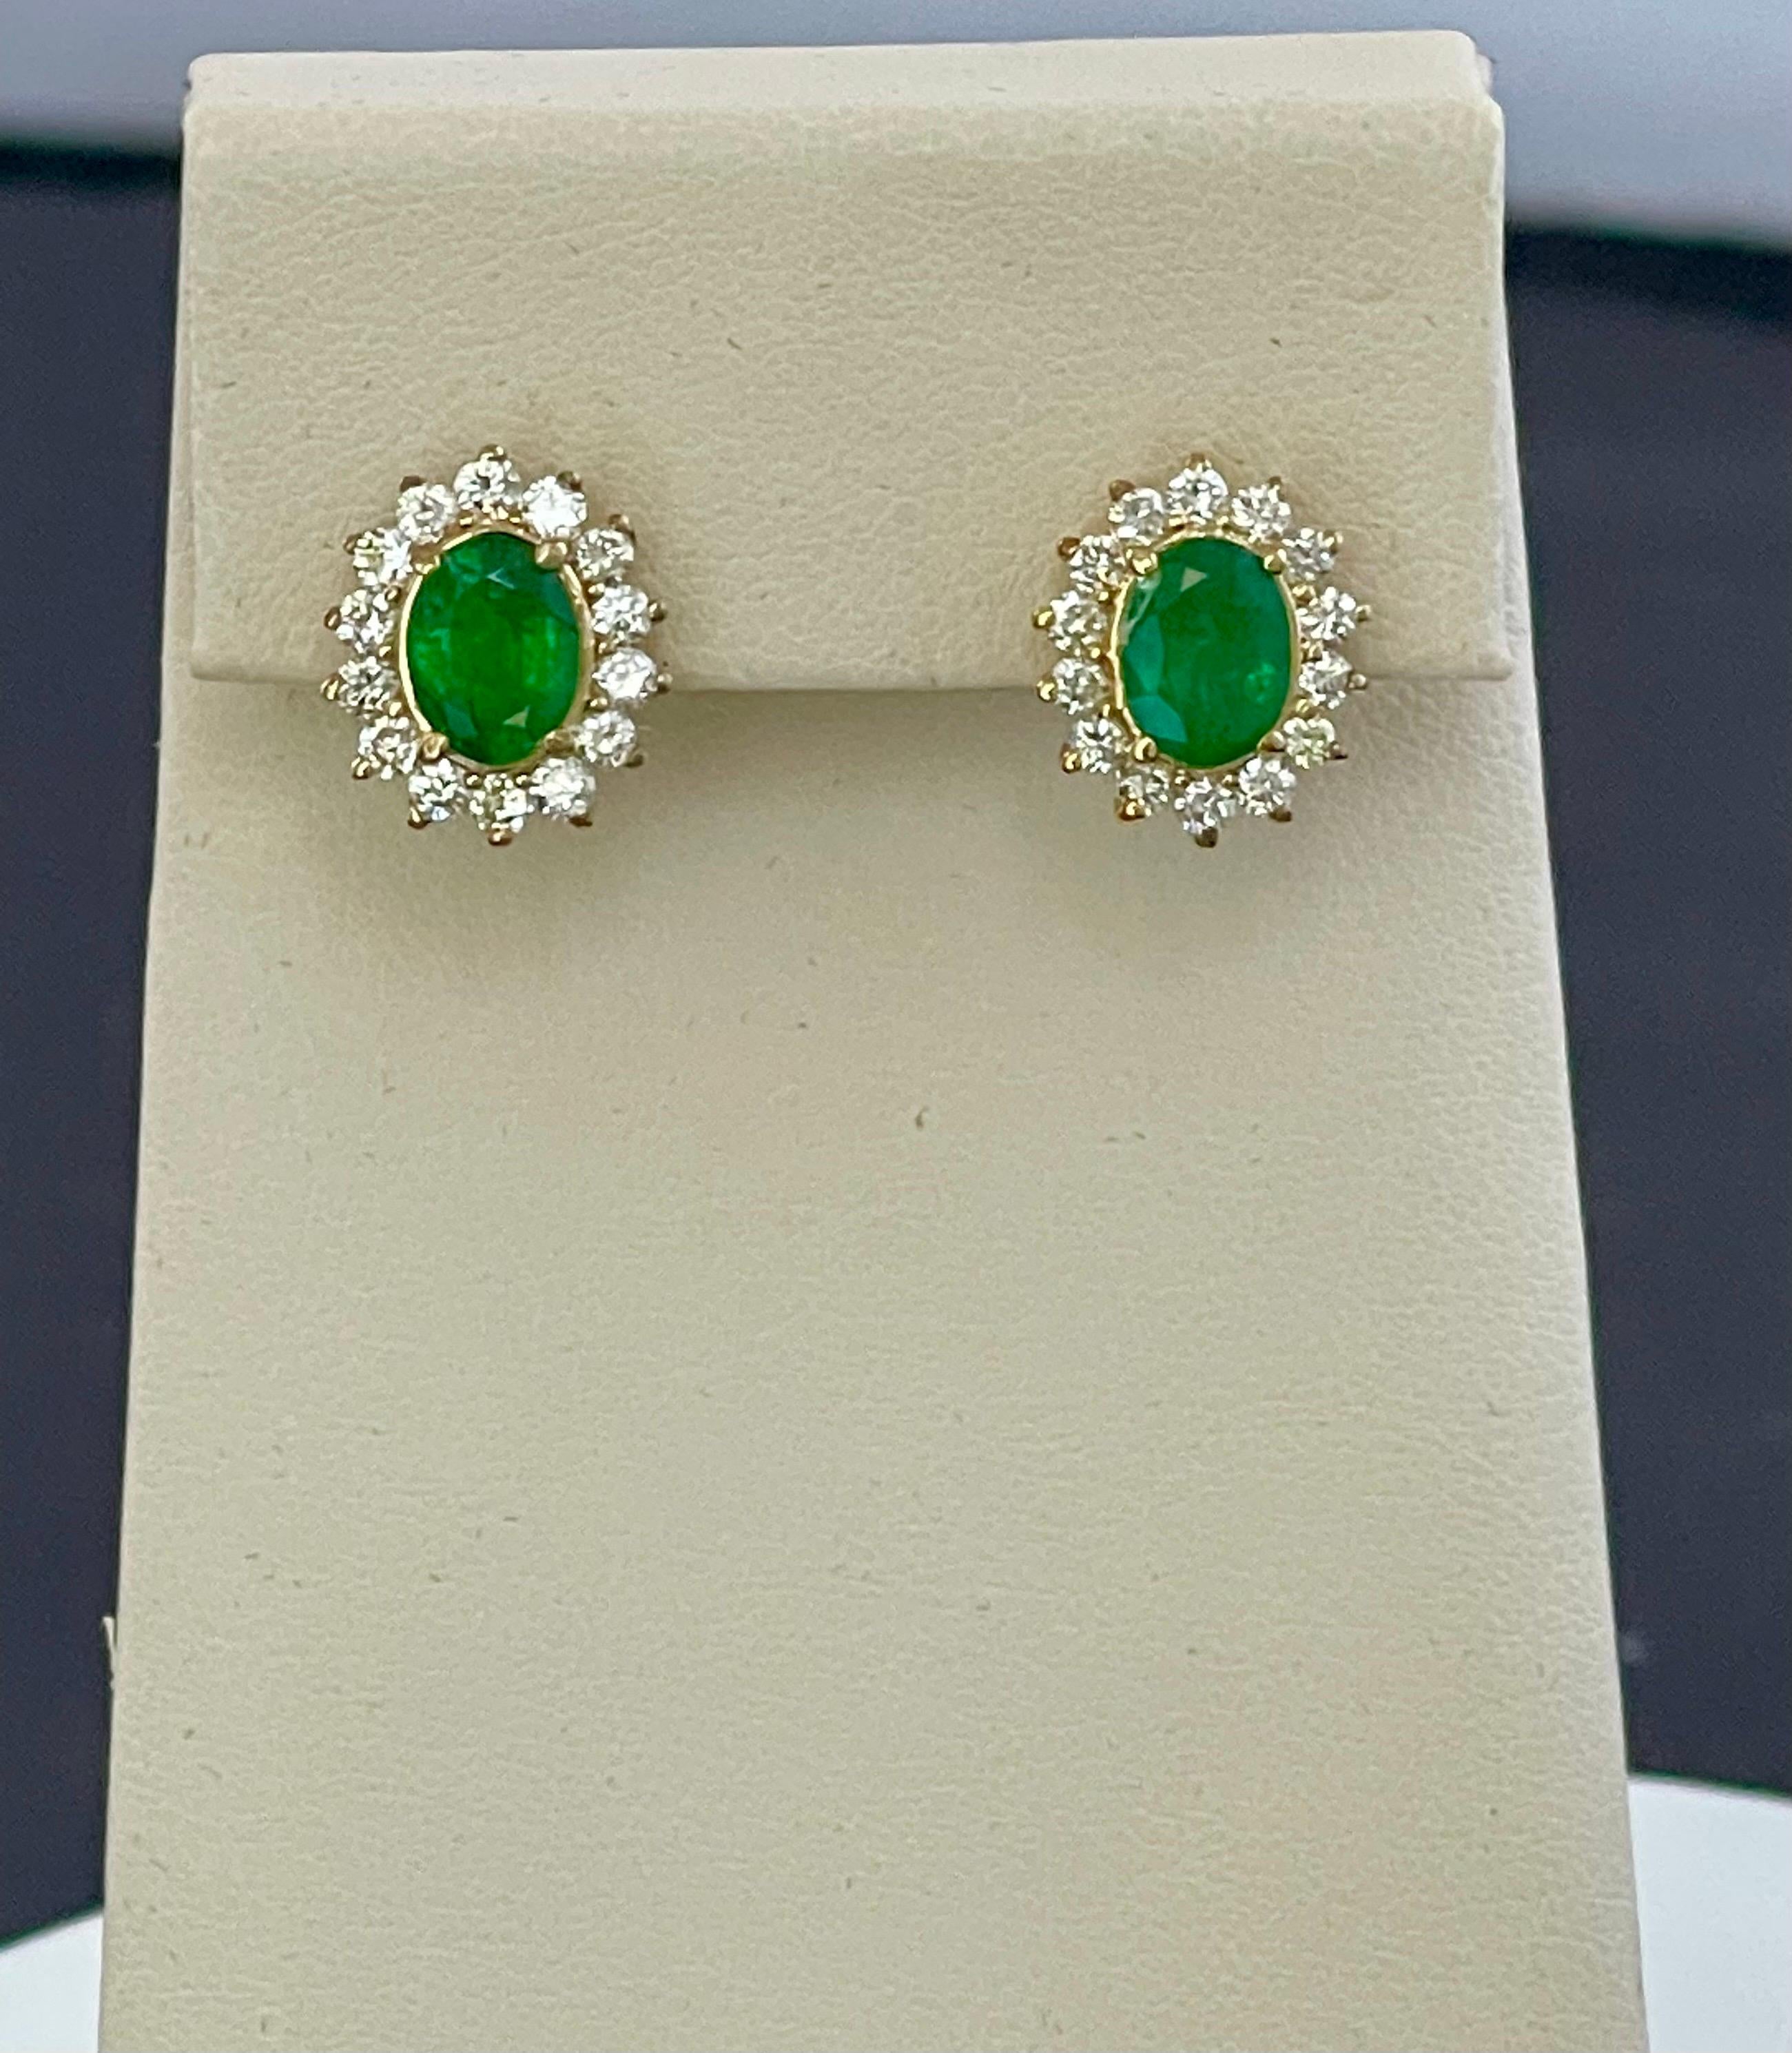 
Approximately 2.8 Carat Oval Shape Natural Emerald & Diamond Post Back Earrings 14 Karat Yellow  Gold
Two emerald weighing approximately  2.8 carats Total
Each emerald is approximately 1.4   ct
Origin Brazil
very very fine Quality of   emeralds ,